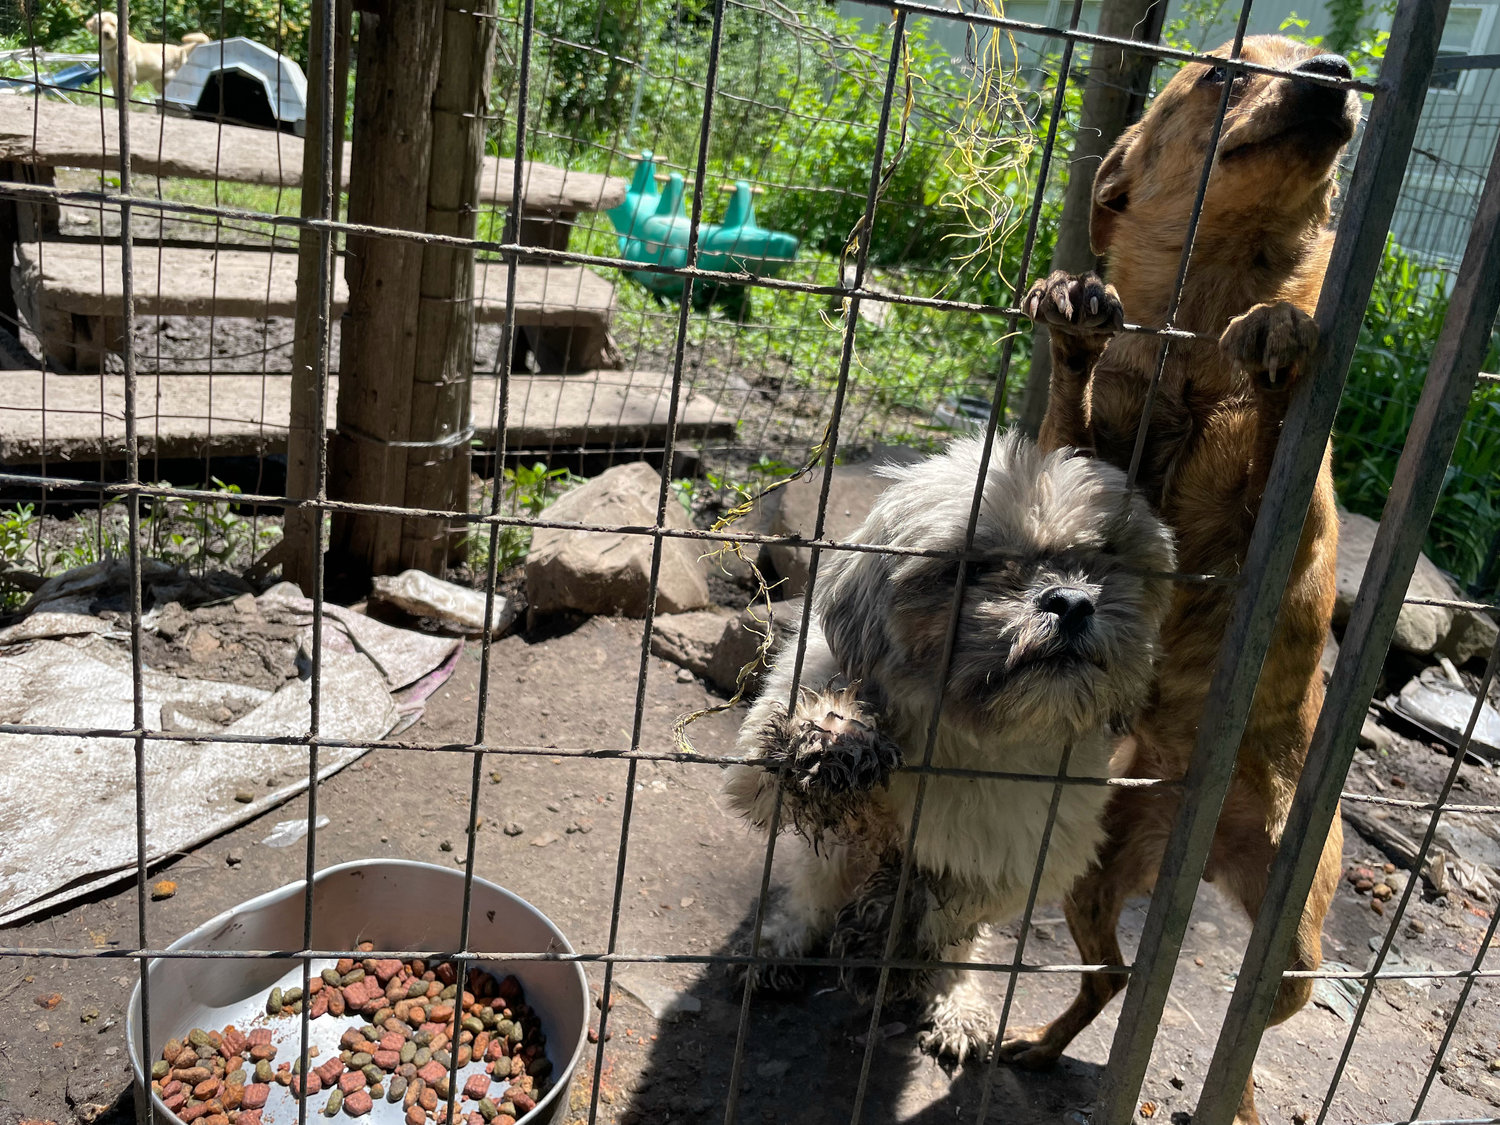 Twelve dogs and 12 cats reside in filthy conditions at a trailer in eastern Pettis County. Their owners could be facing 24 counts of animal cruelty or neglect.